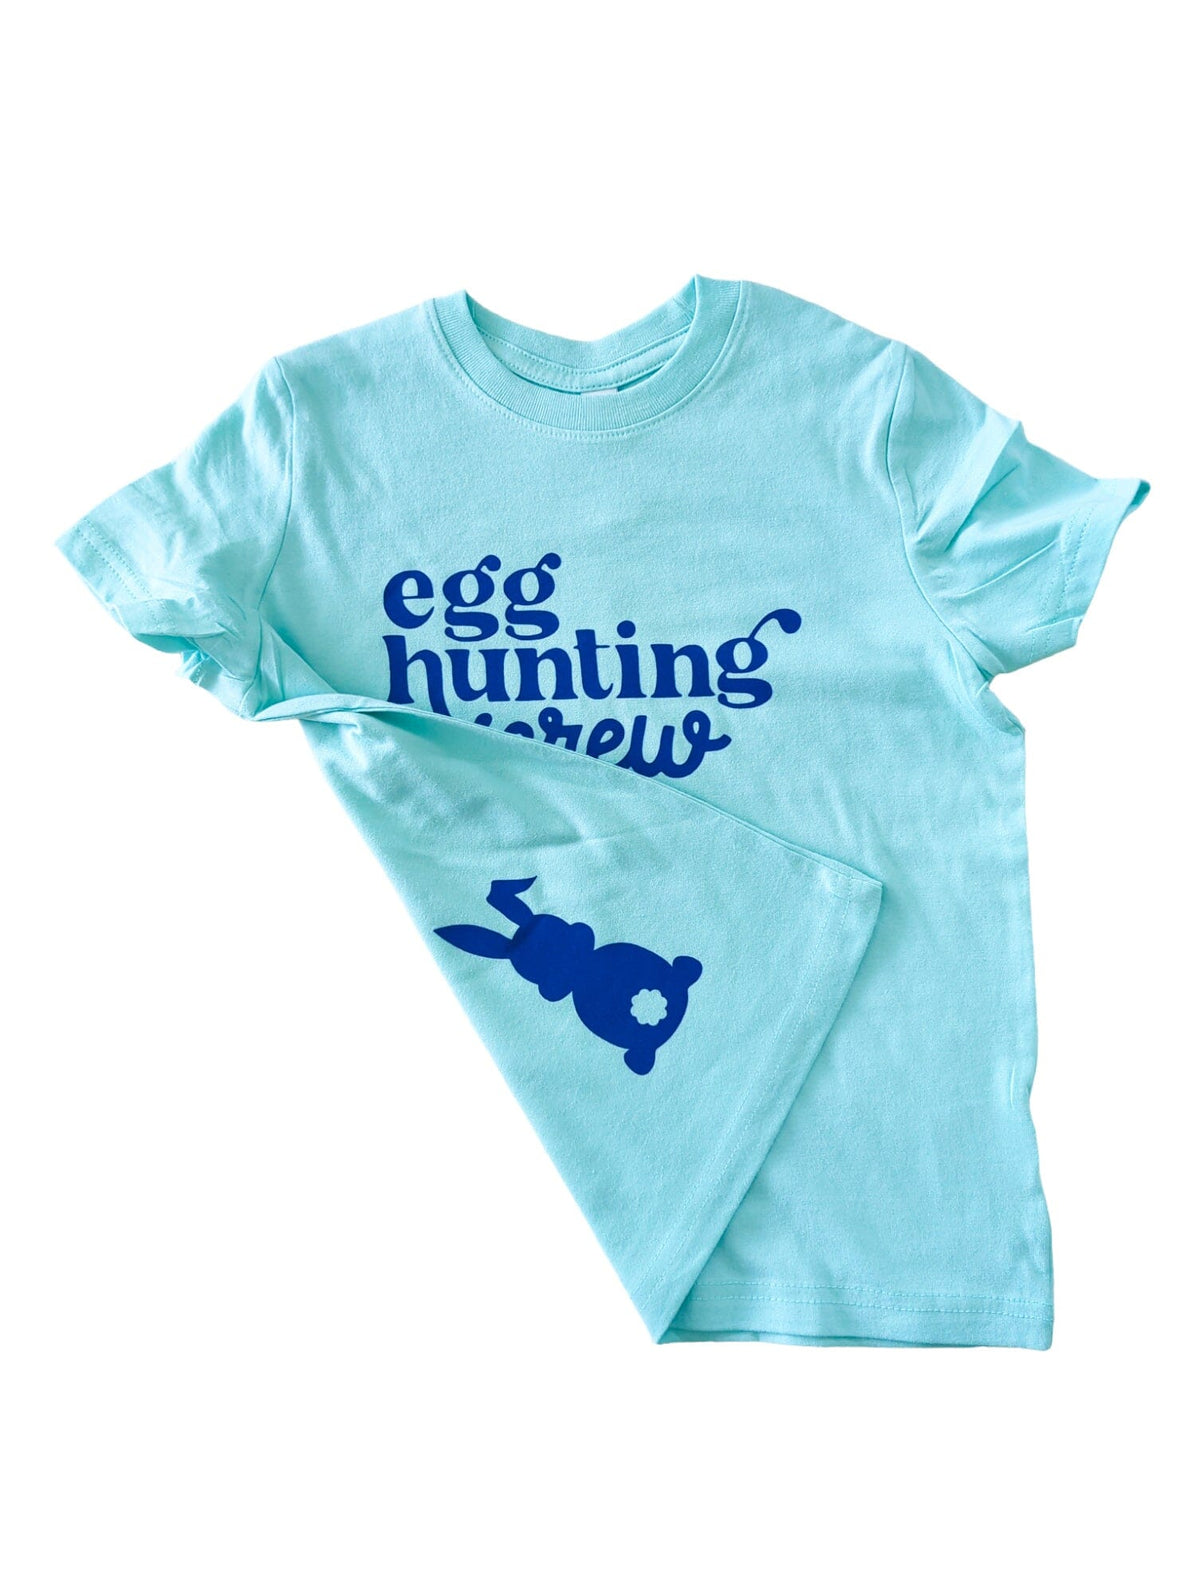 Egg Hunting Crew Top